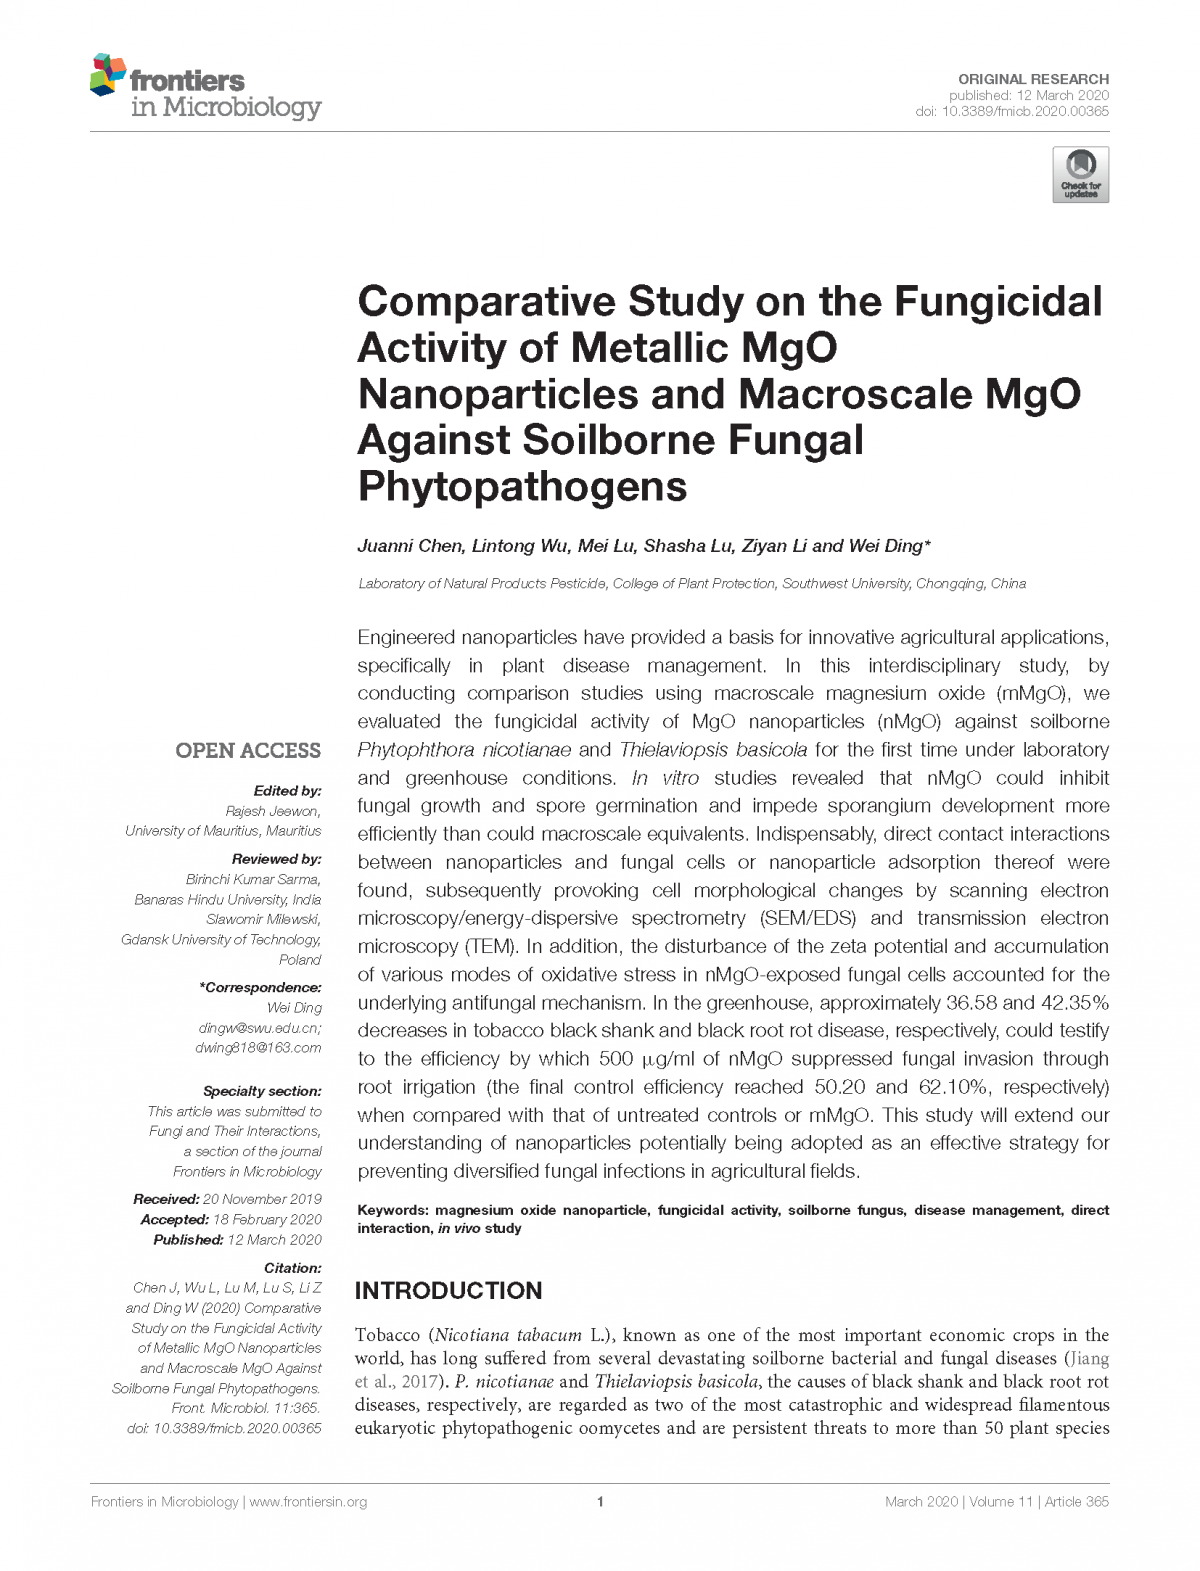 Comparative Study on the Fungicidal Activity of Metallic MgO Nanoparticles and Macroscale MgO Against 